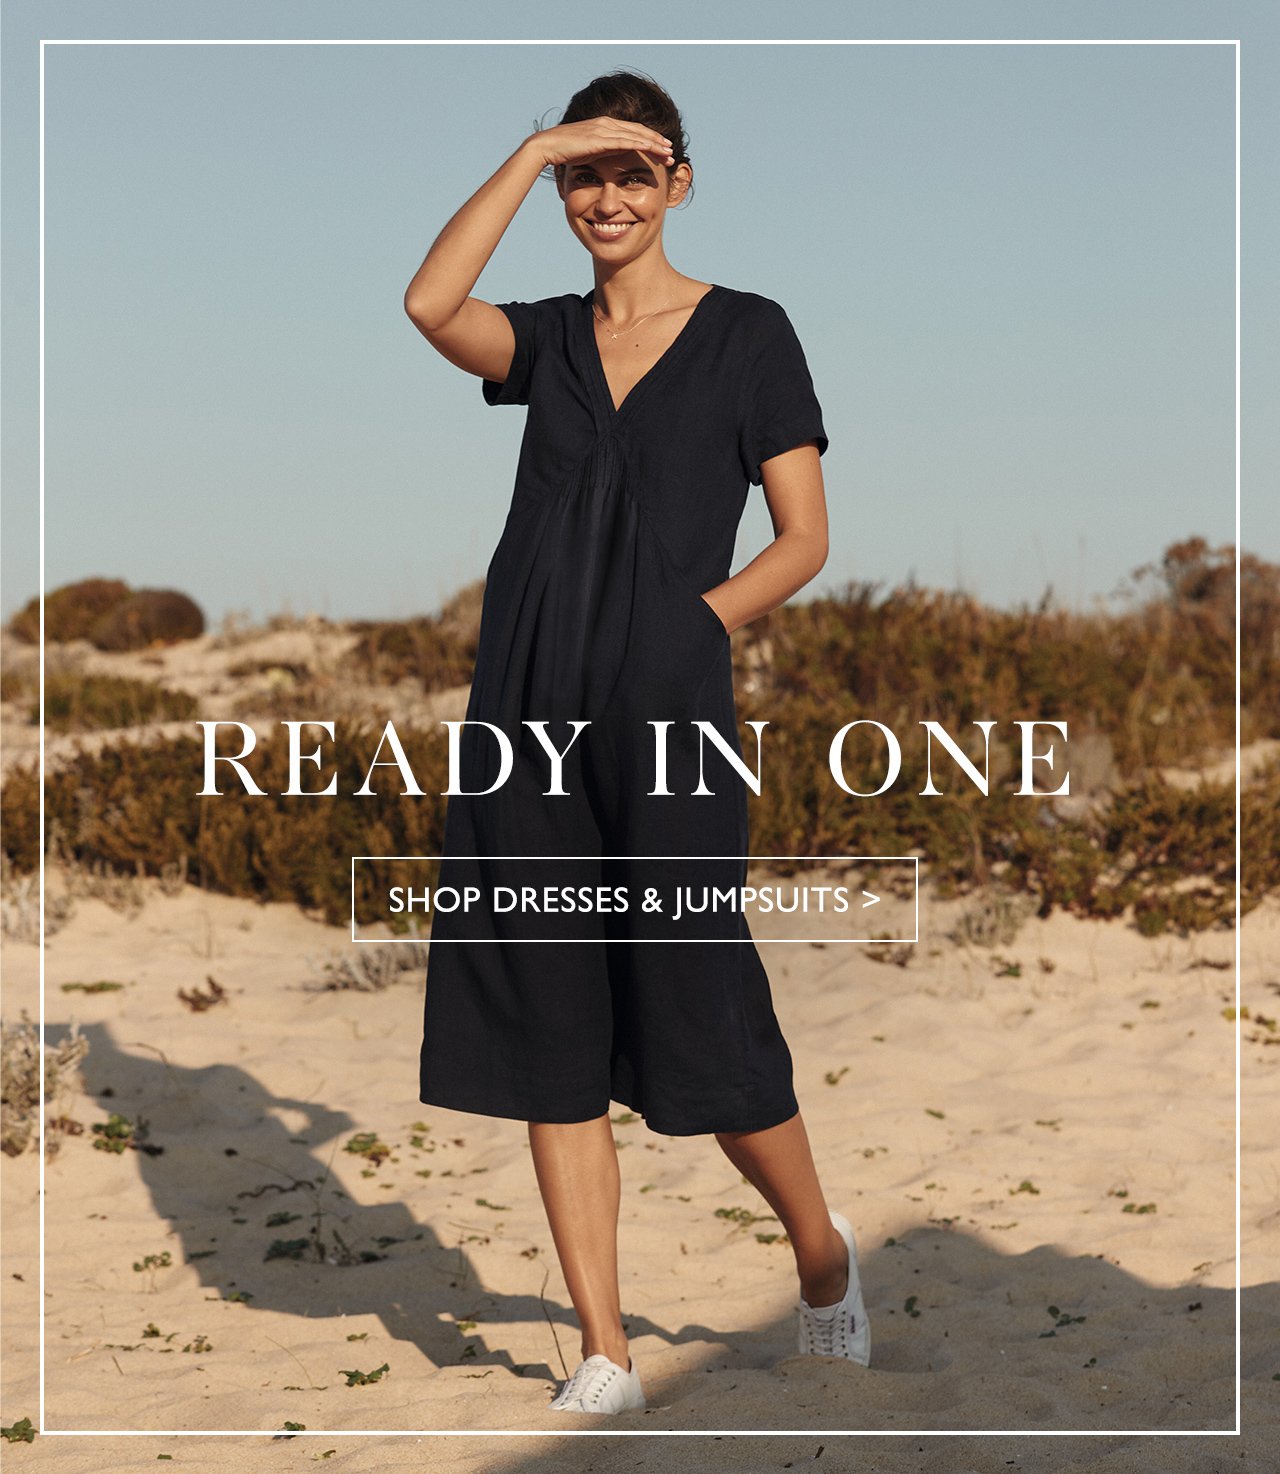 Ready in one | SHOP DRESSES & JUMPSUITS